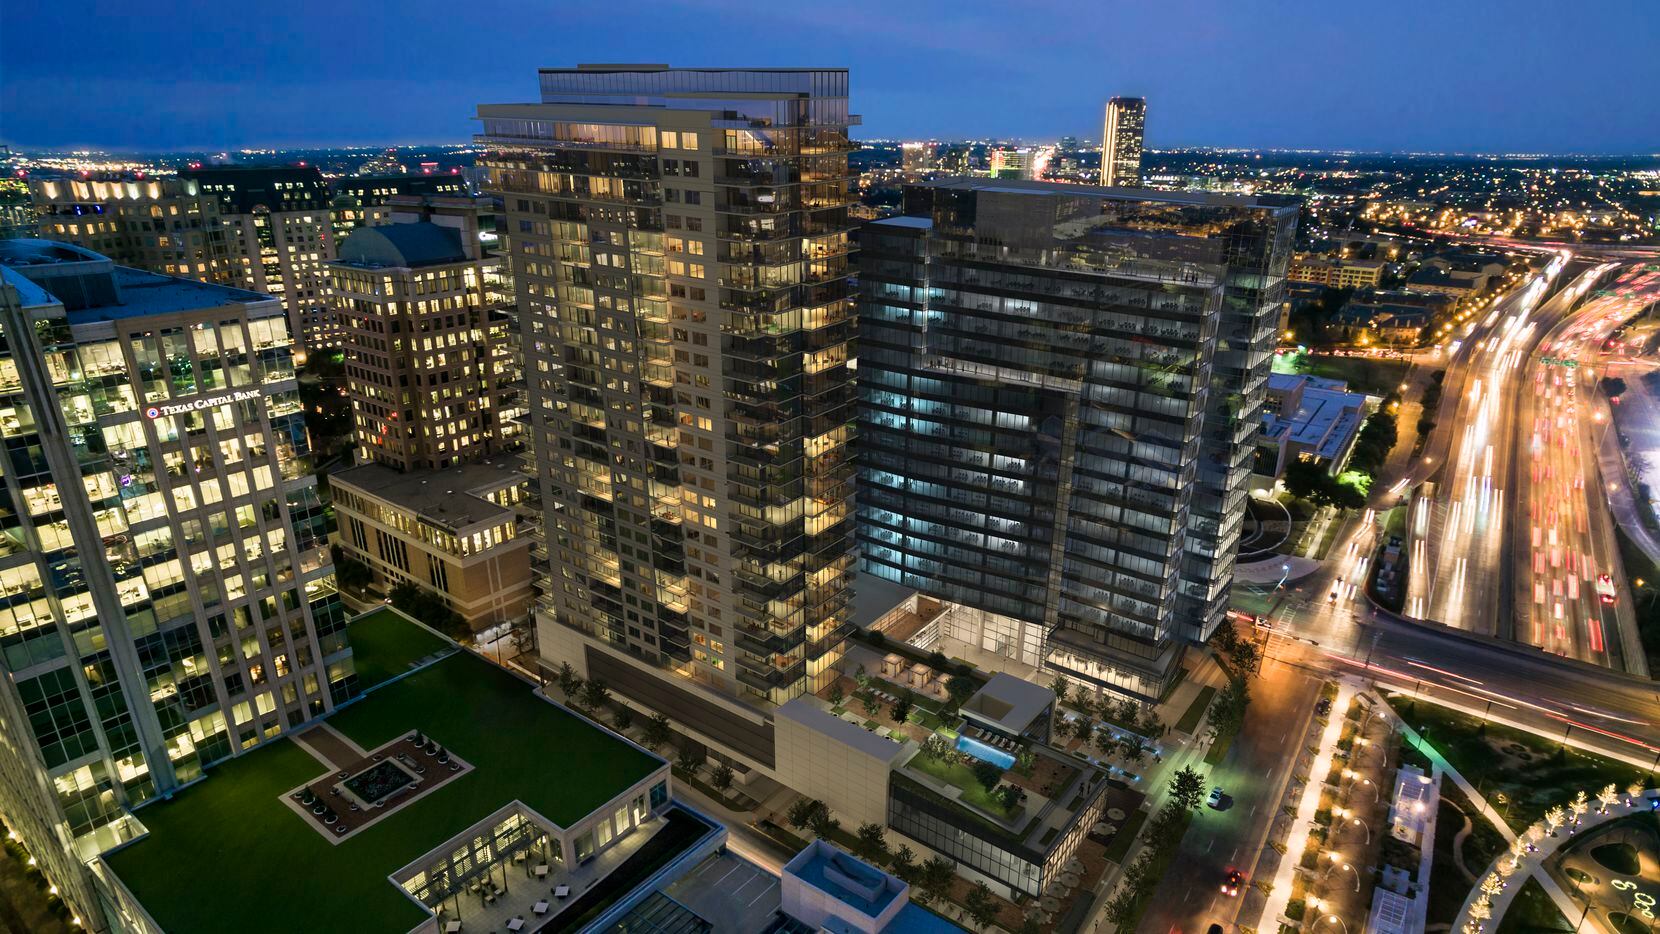 The 34-story Residences at Park District tower is on Klyde Warren Park and will start leasing in early 2018.